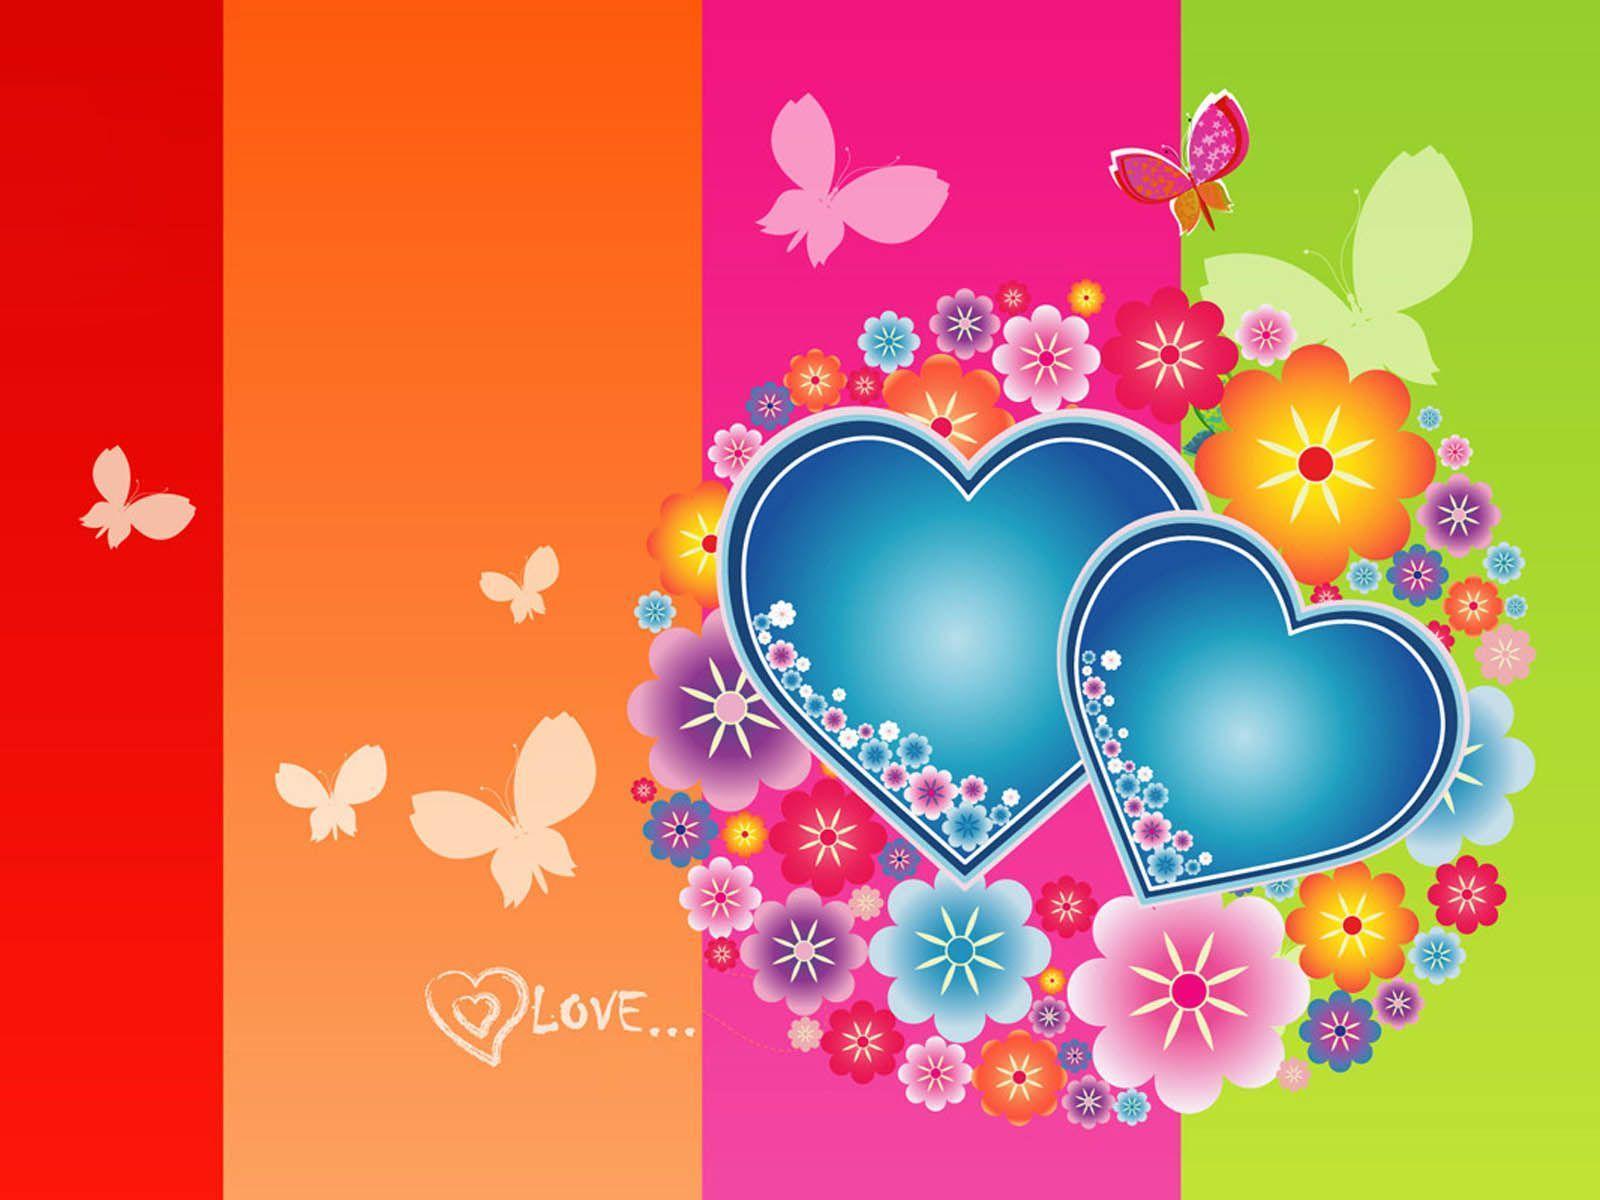 Love Heart Wallpaper Background. quotes